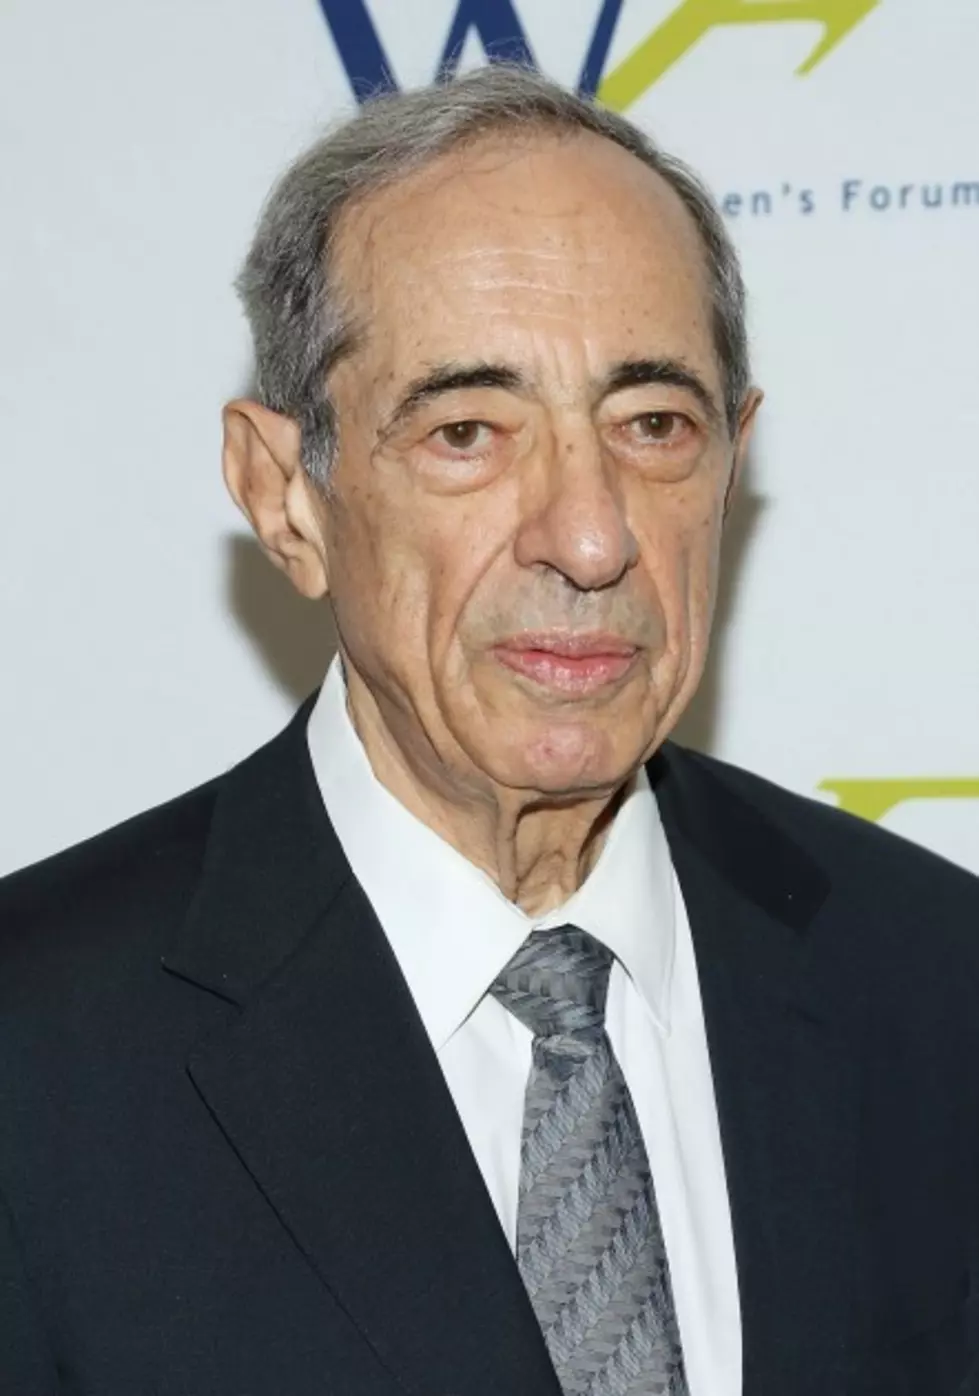 New York Says Good-Bye To Former Governor Mario Cuomo